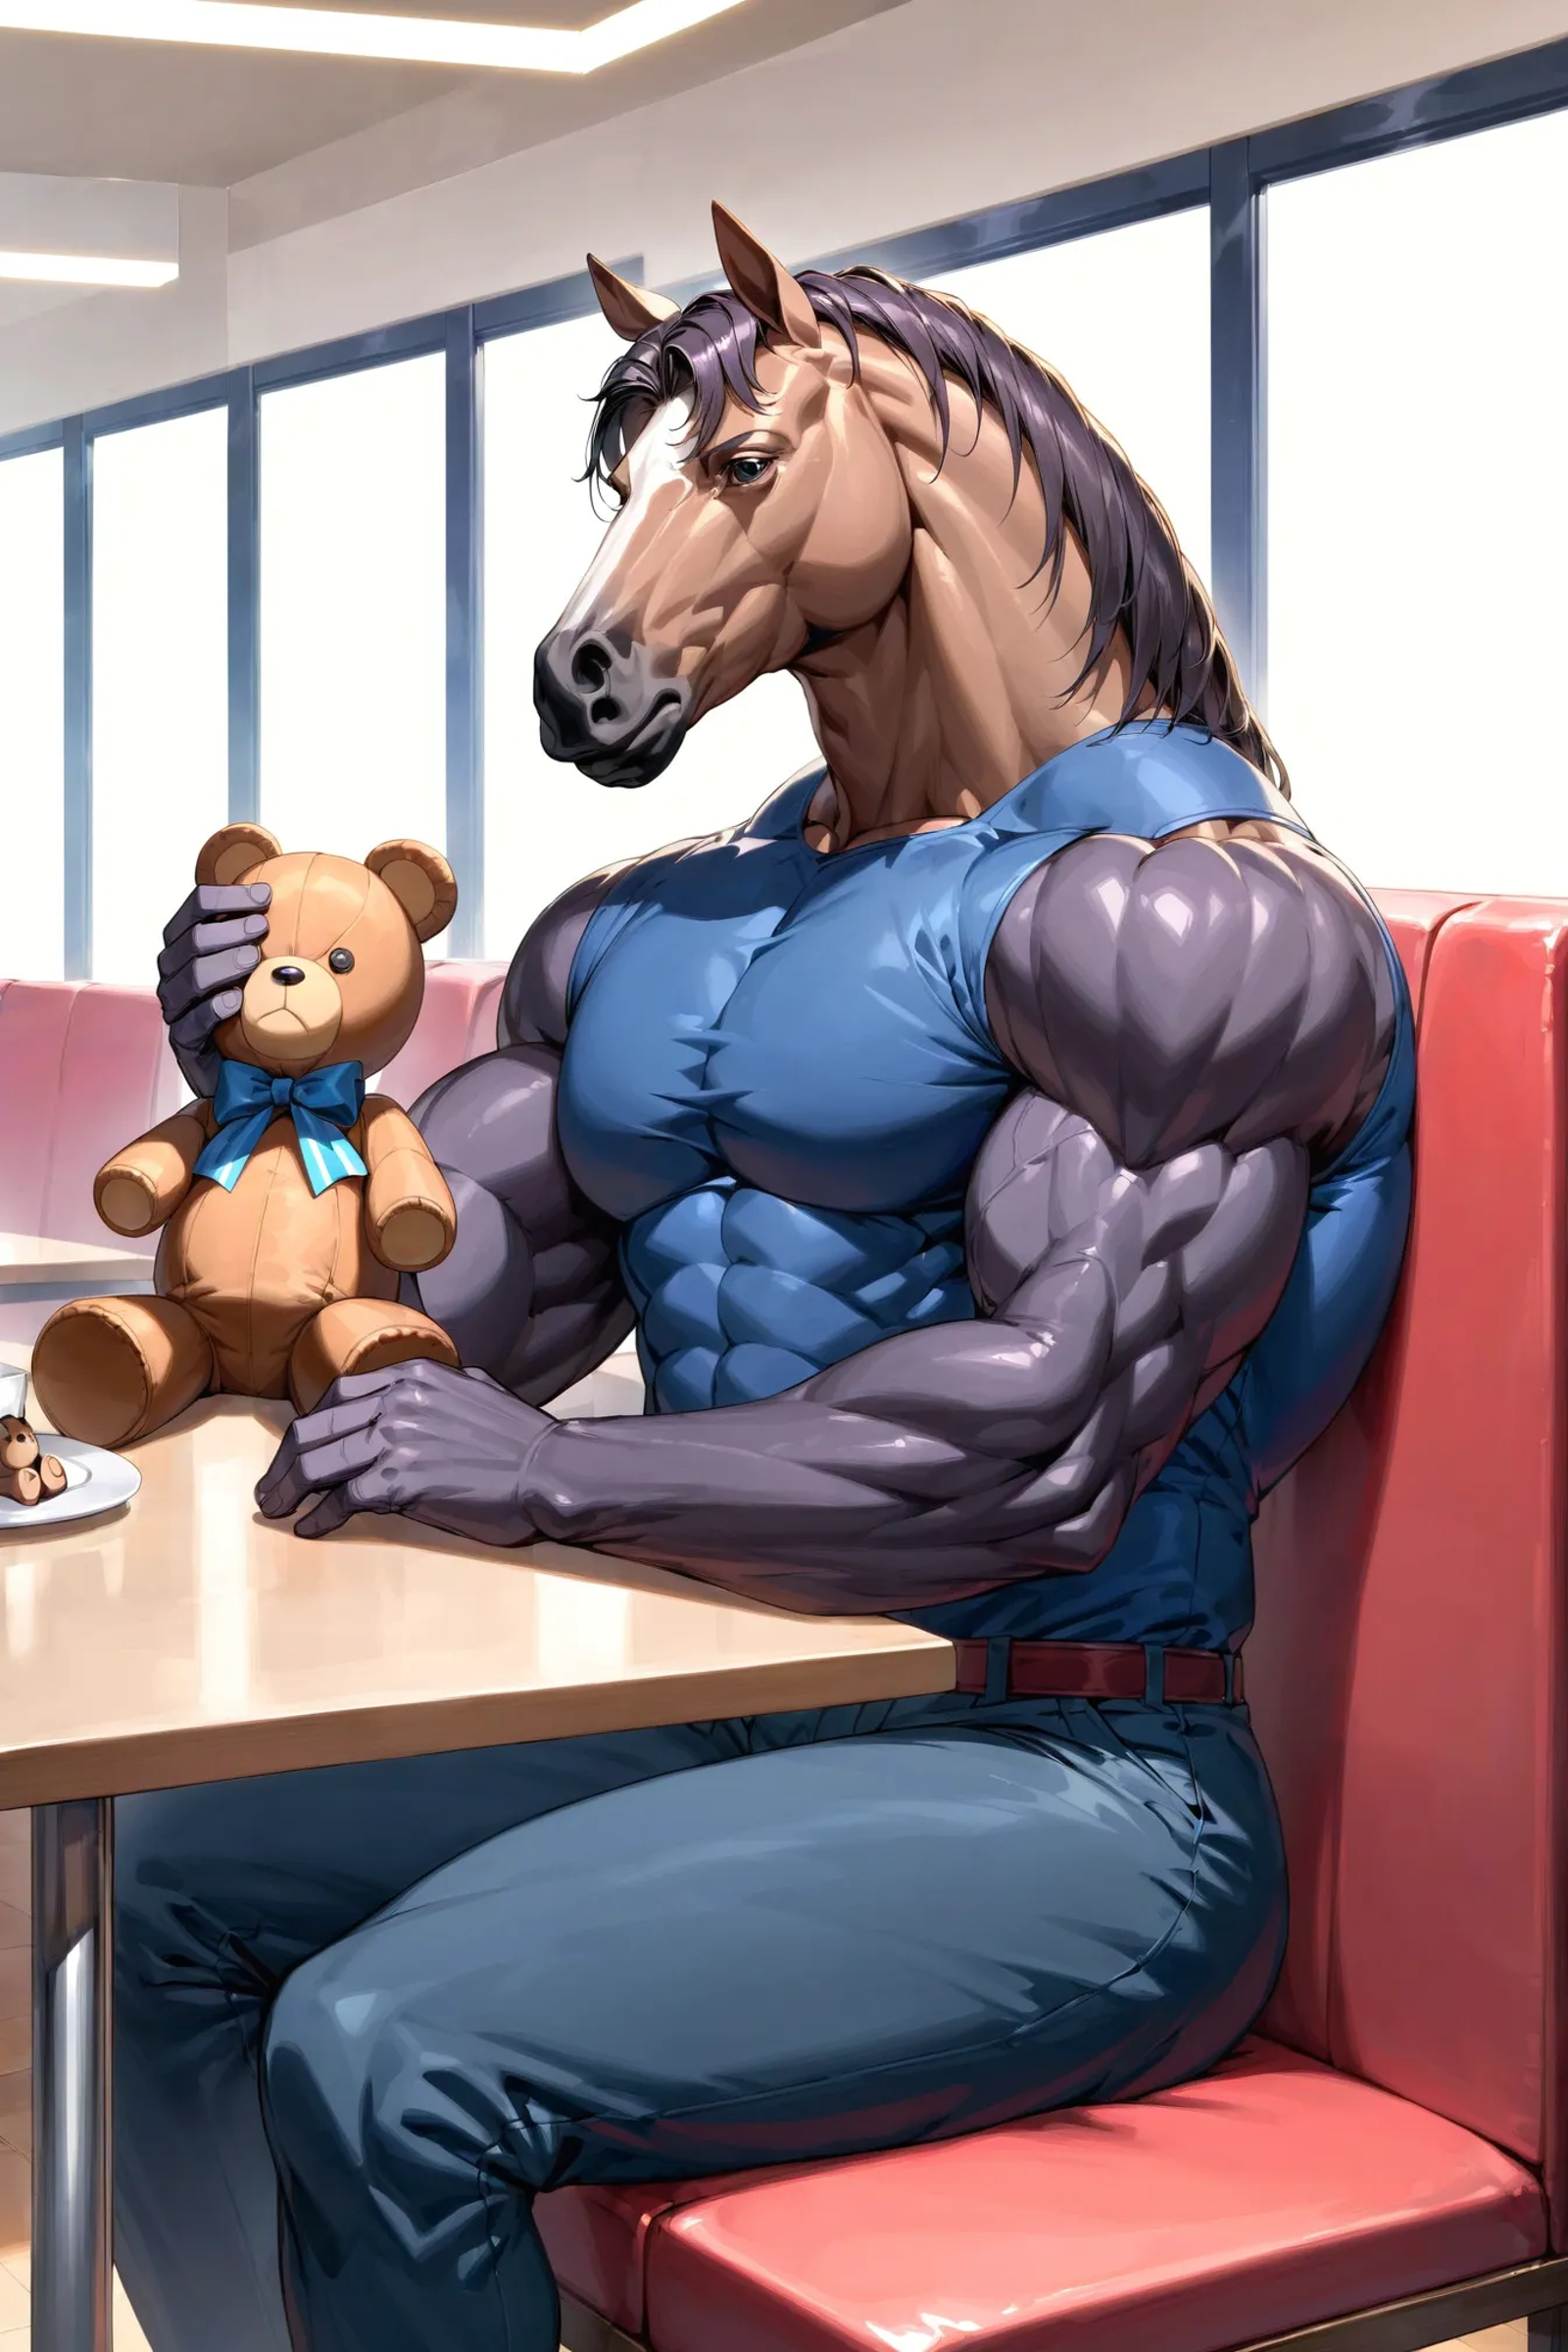 horse, muscular, sitting, holding teddy bear, expressionless, no humans, restaurant